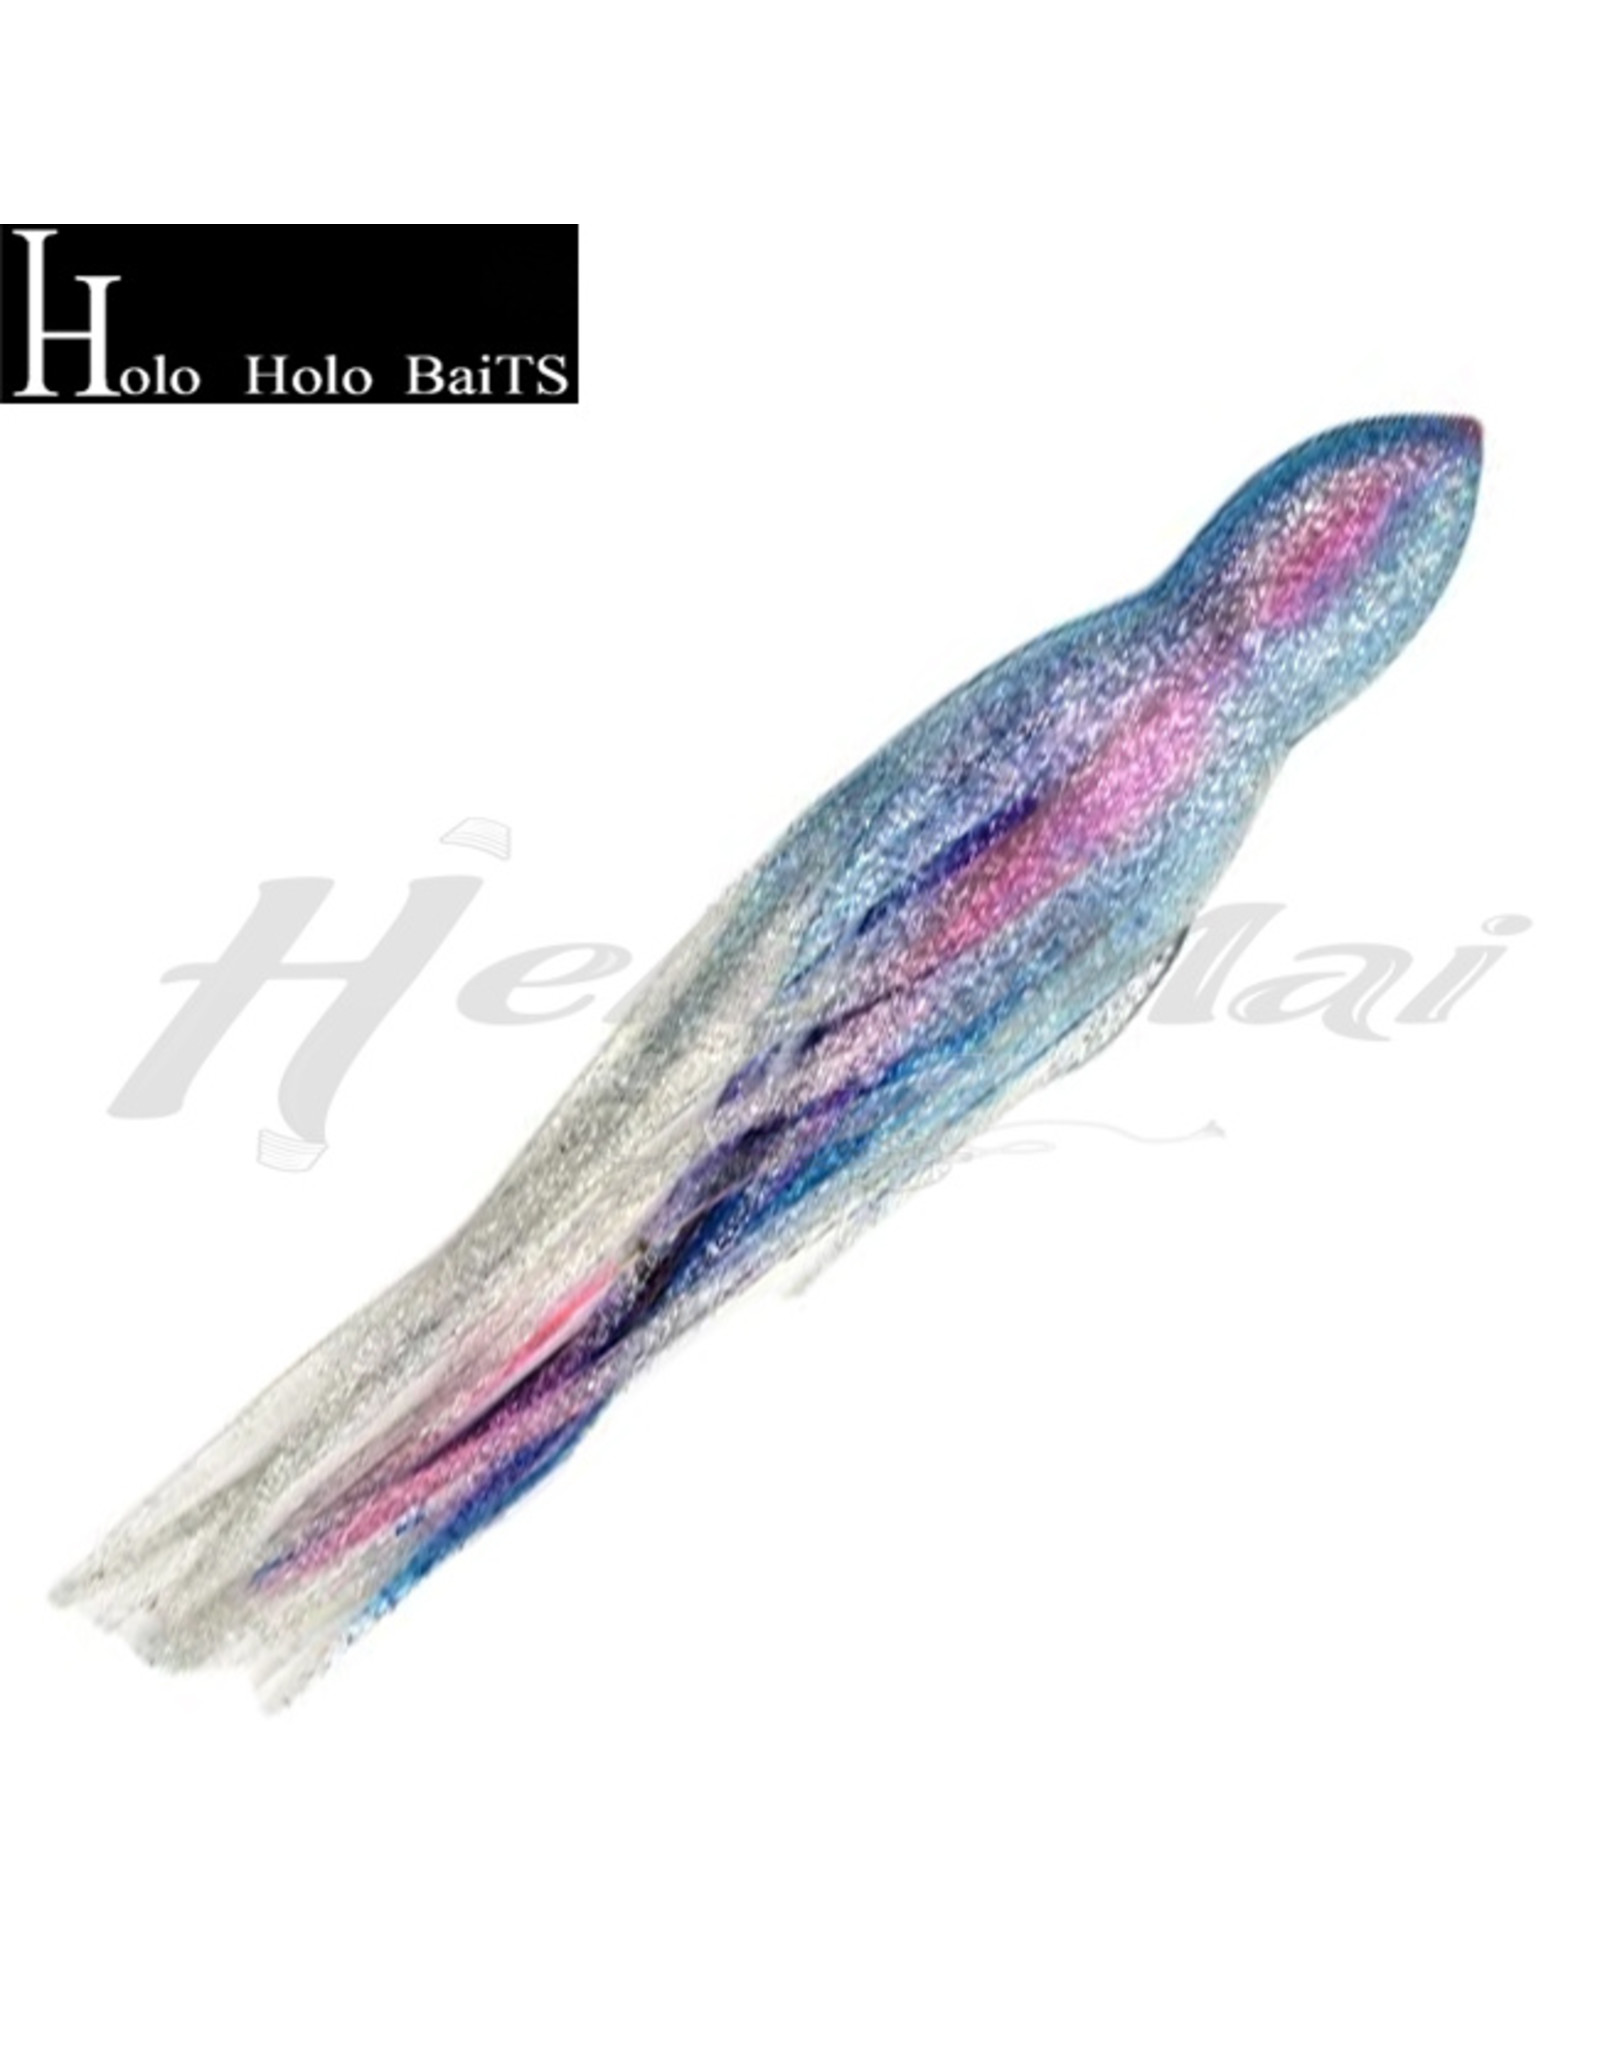 HOLO HOLO HAWAII (HHH) HH, 9" SQUID SKIRT SILVER GLITTERS BLUE PINK 1473